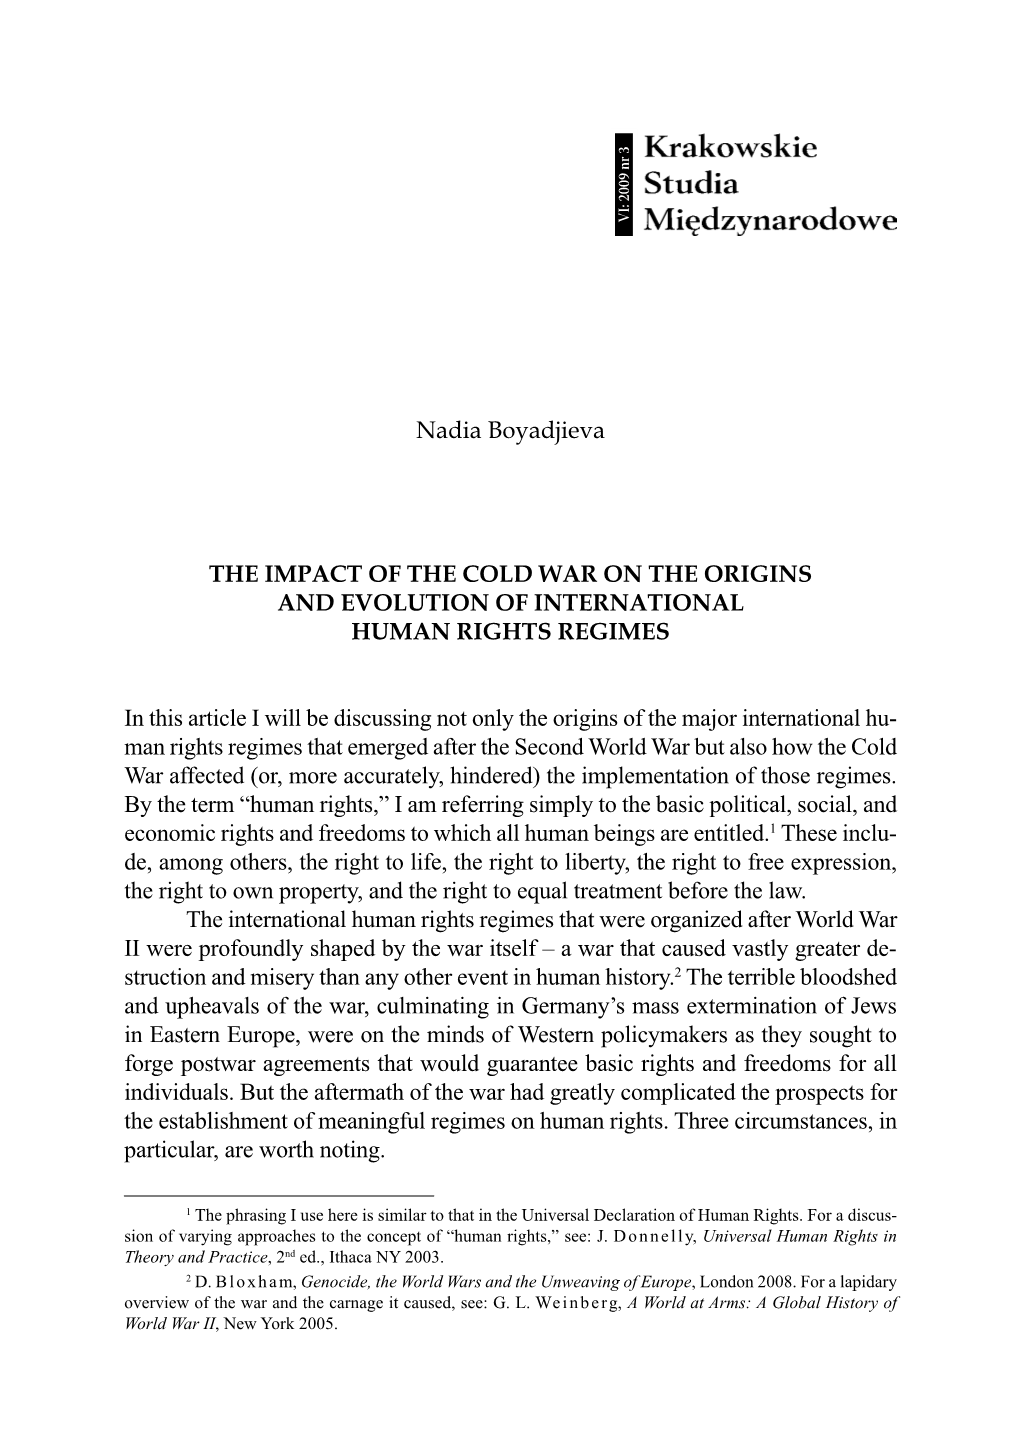 The Impact of the Cold War on the Origins and Evolution of International Human Rights Regimes